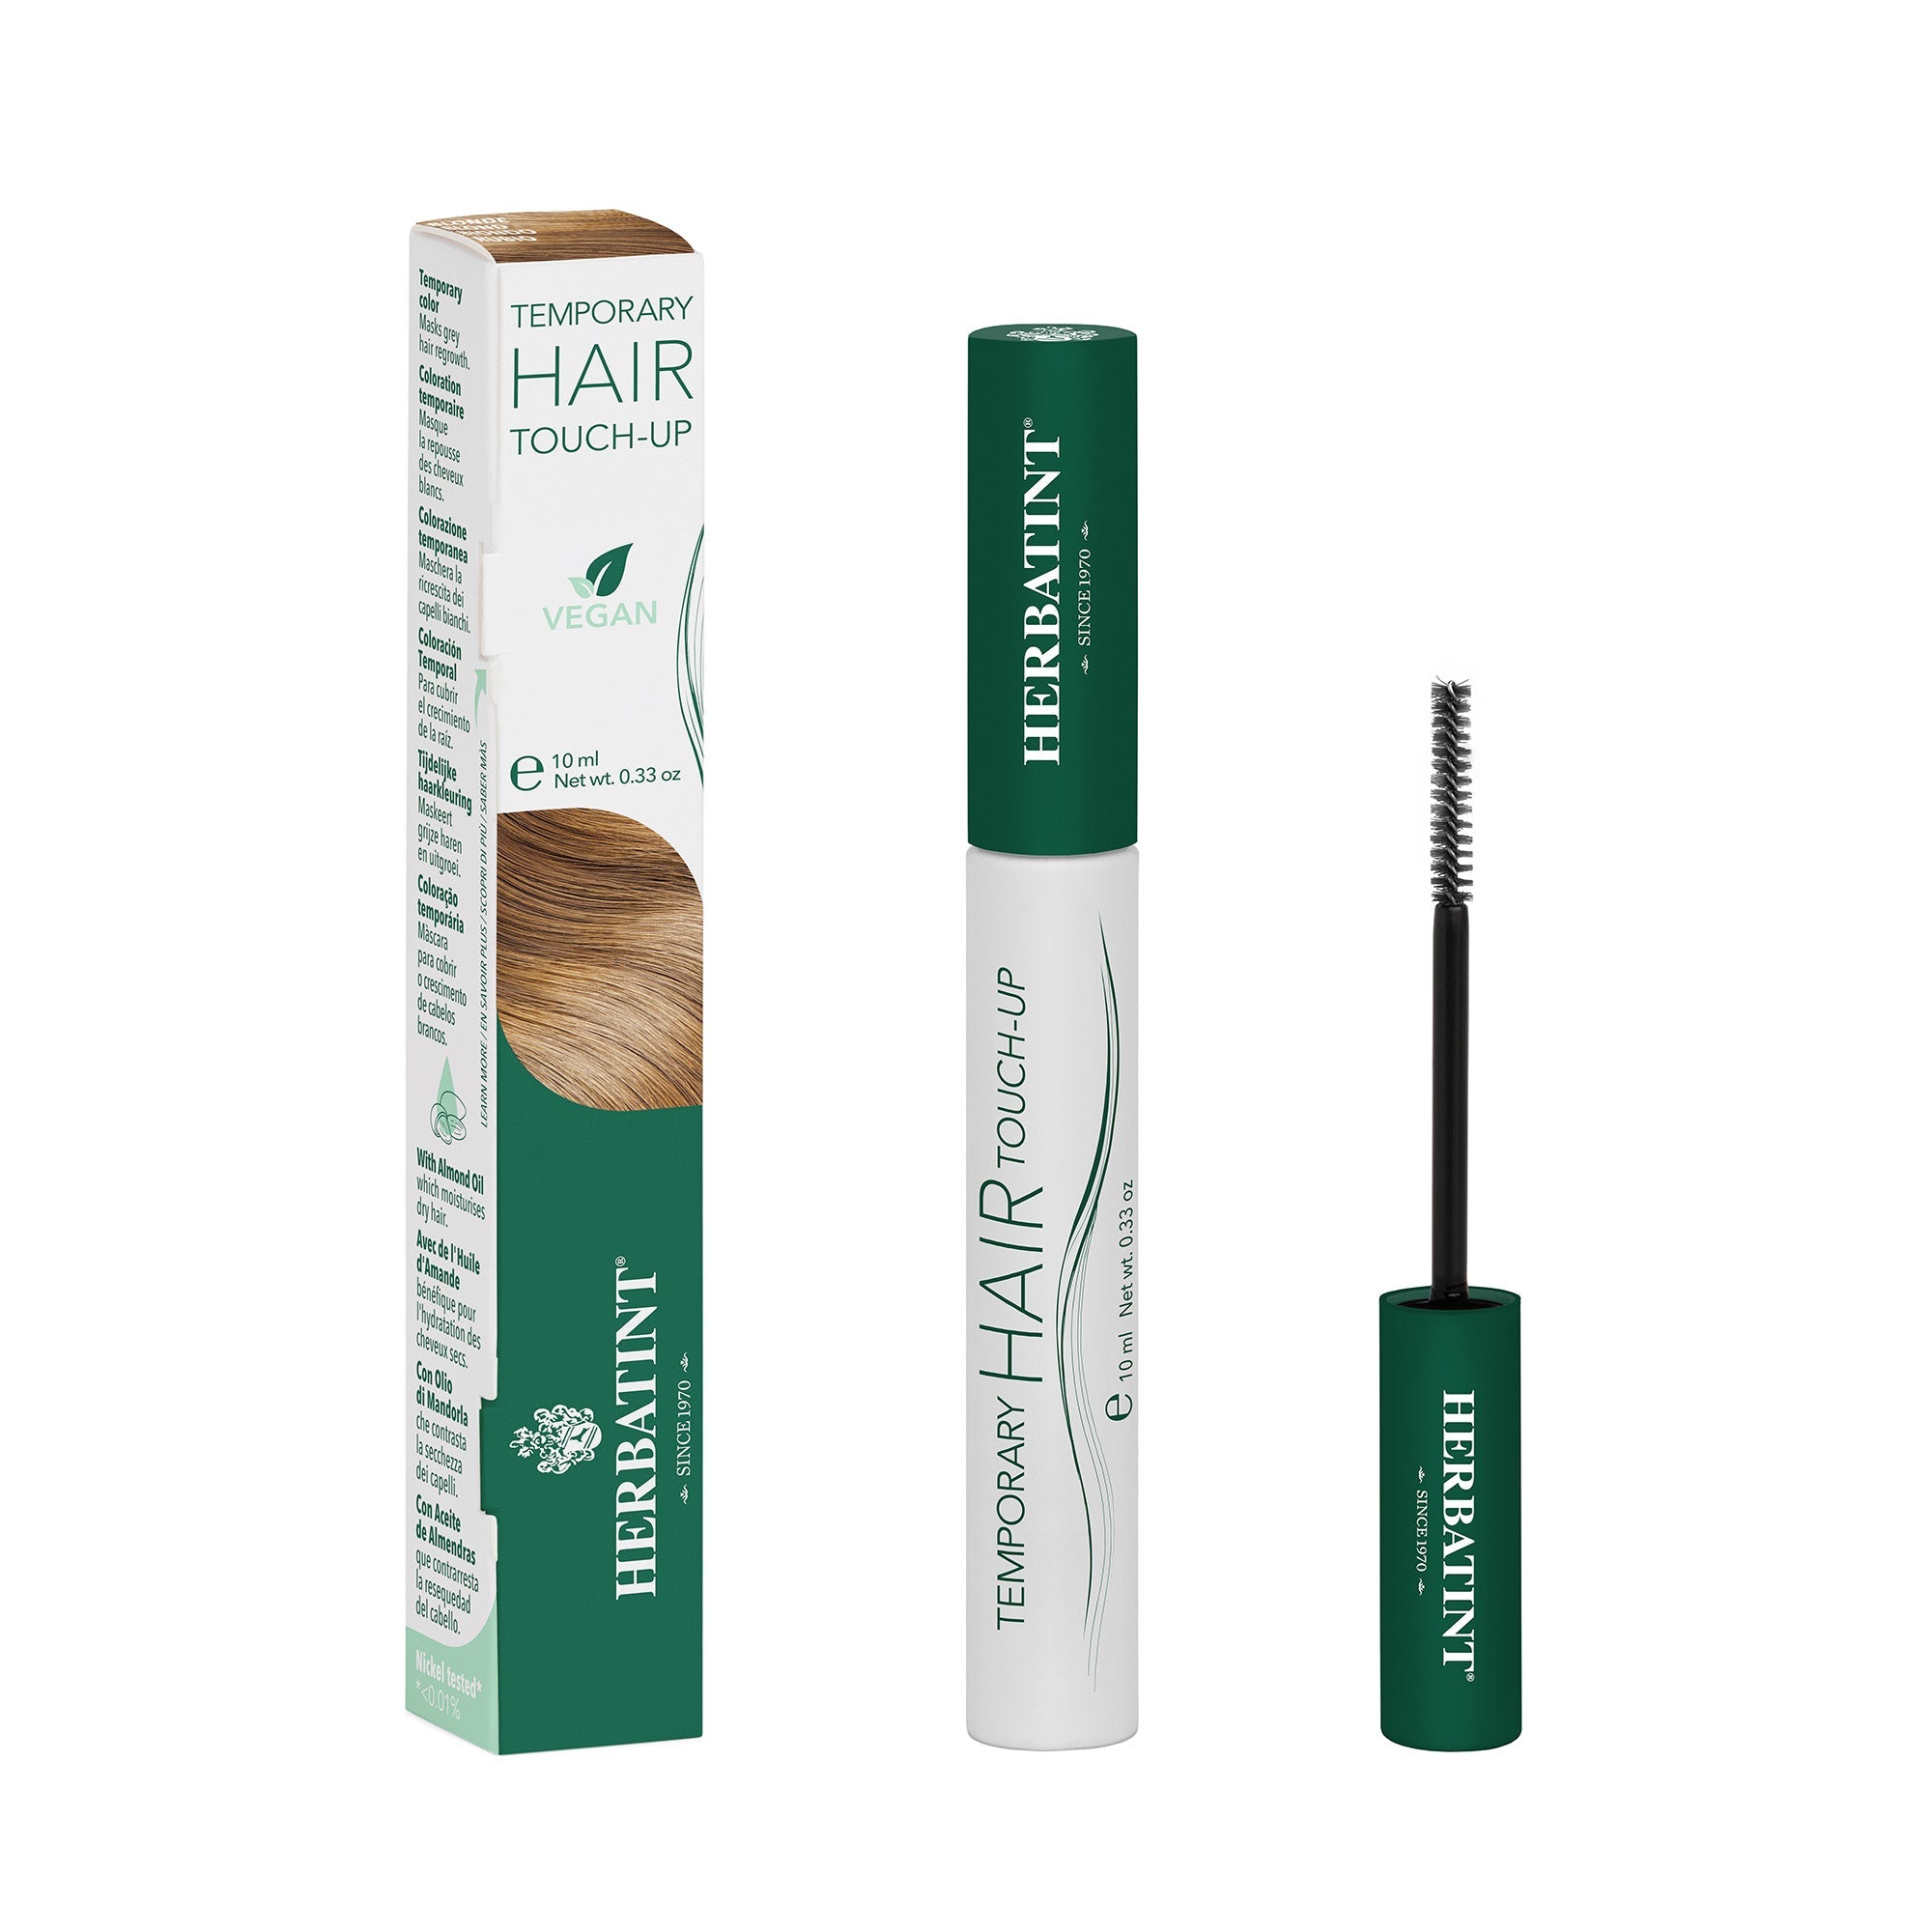 Herbatint Temporary Hair Touch-up Blonde 60 mL - A.Vogel Canada